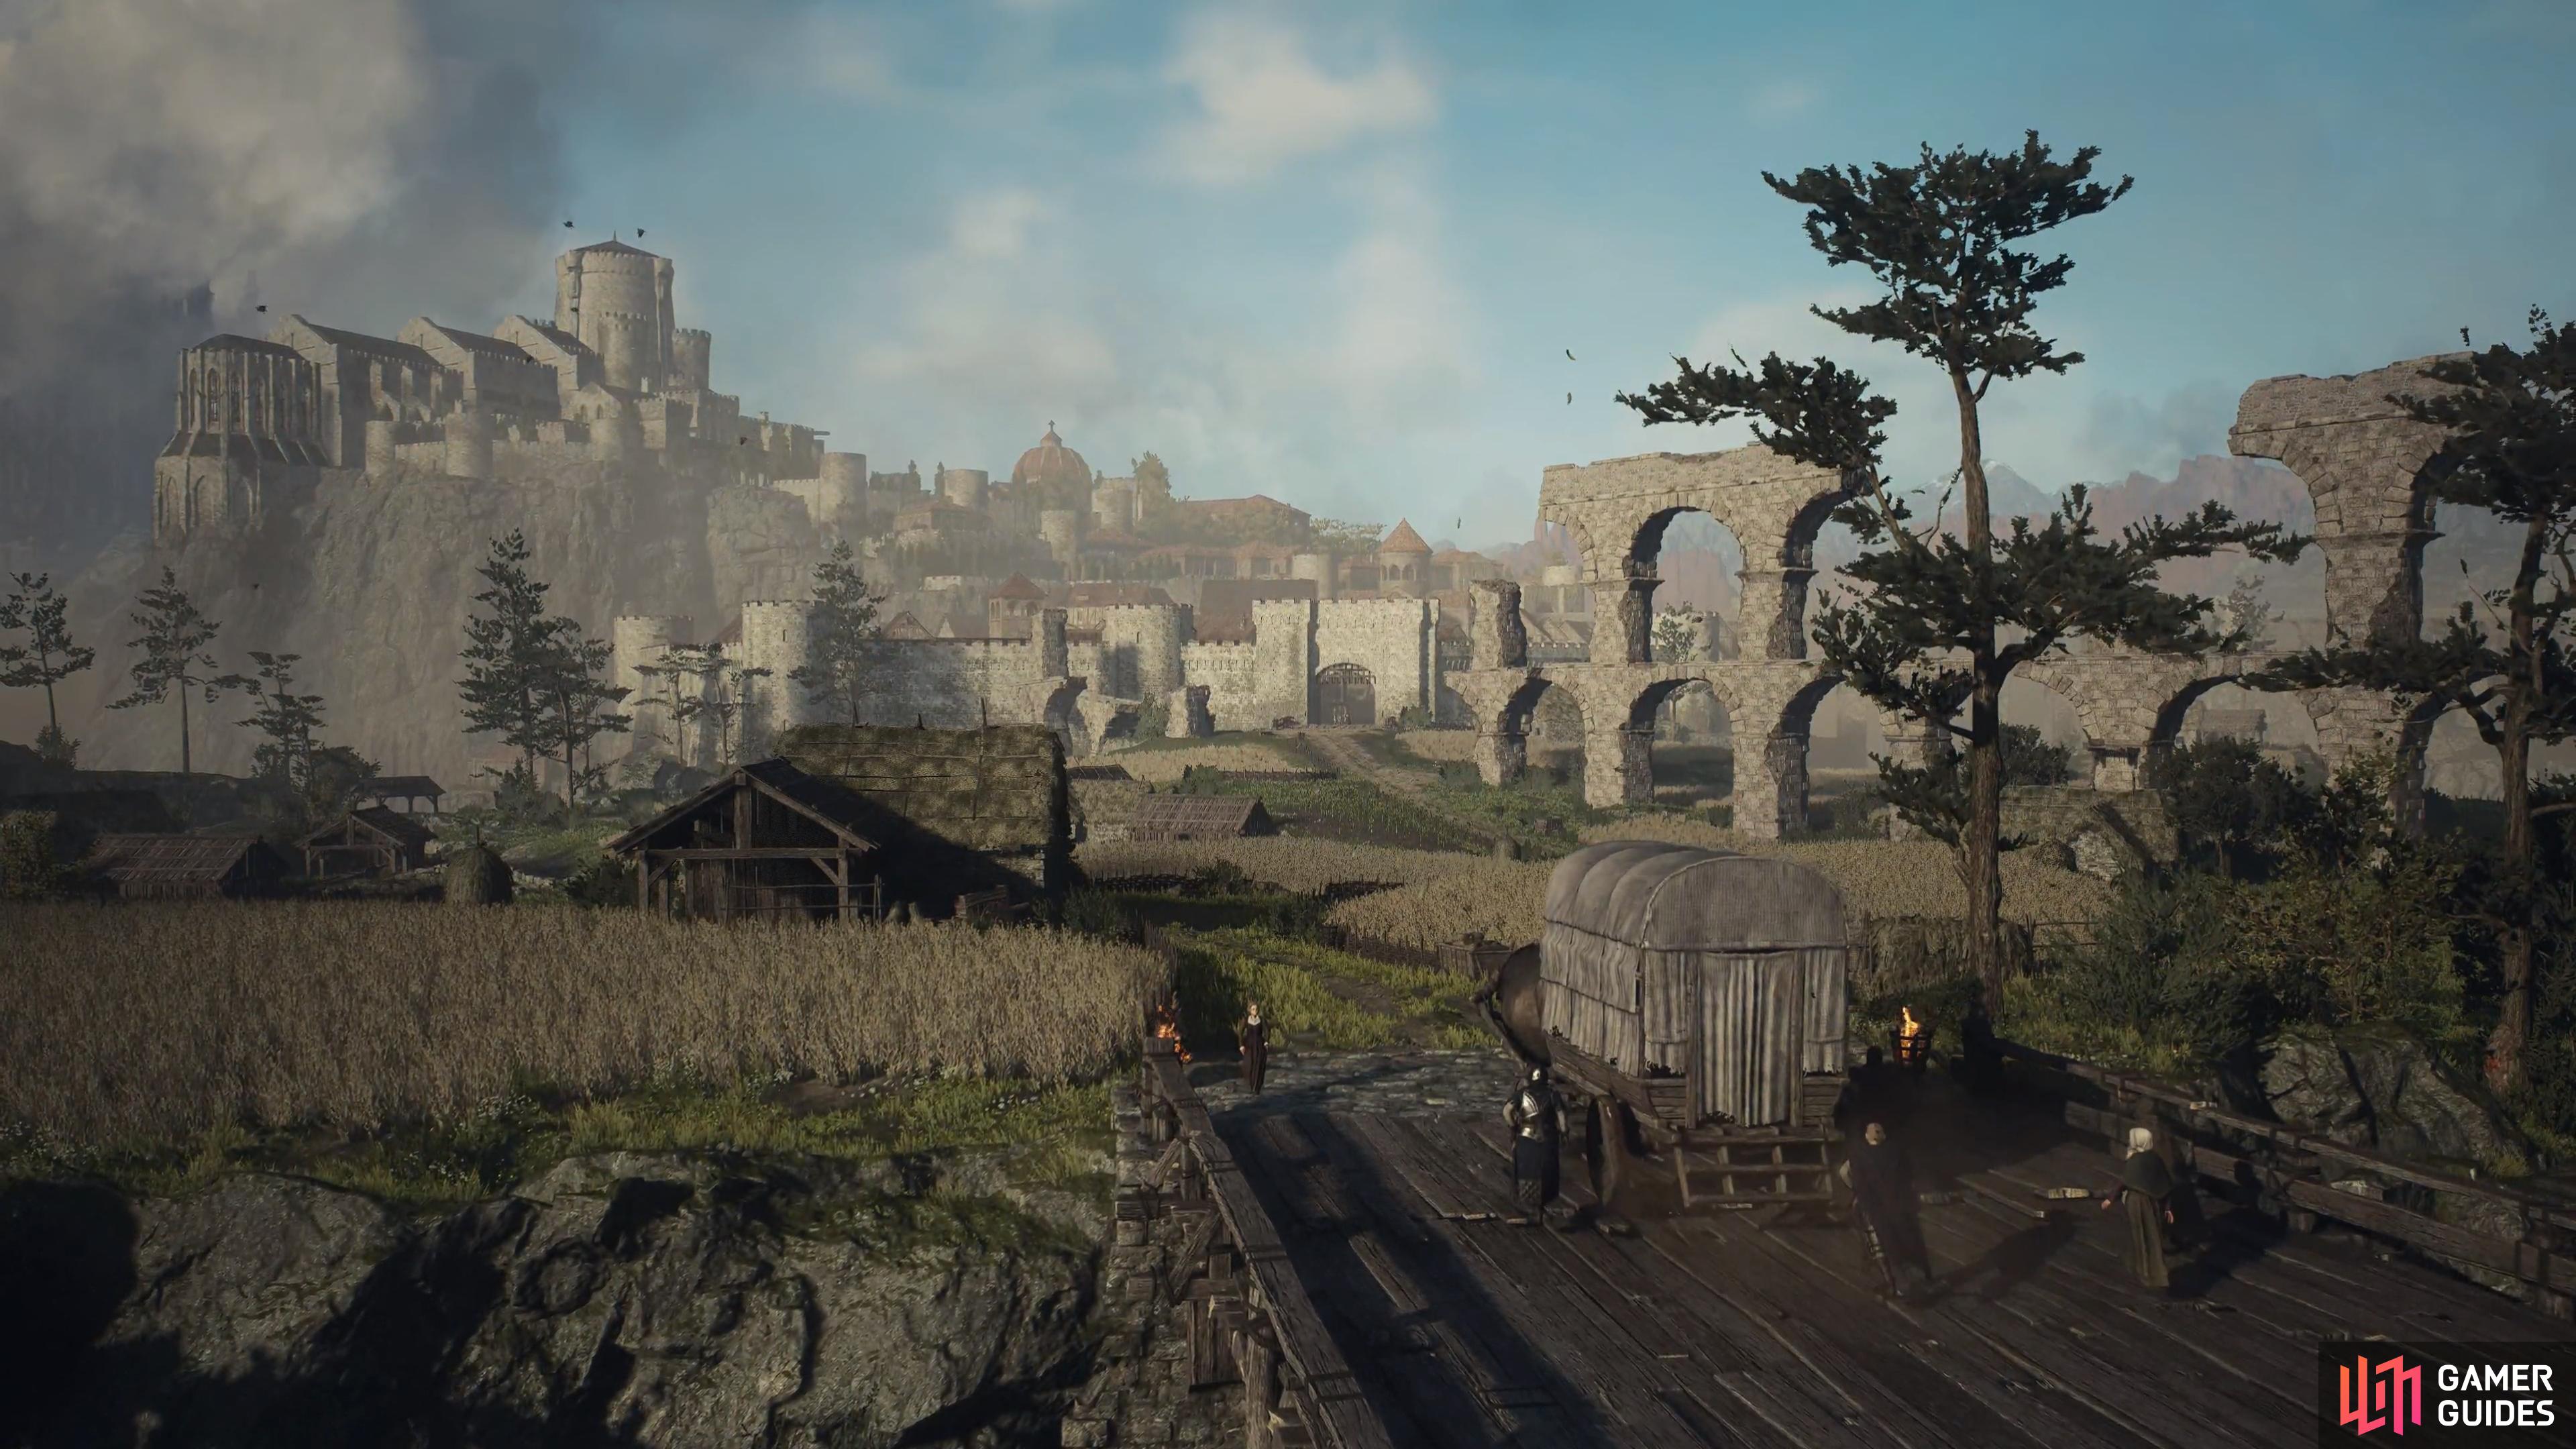 Your FPS is likely to tank while you’re in the main cities in Dragon’s Dogma 2, even with a relatively powerful rig.